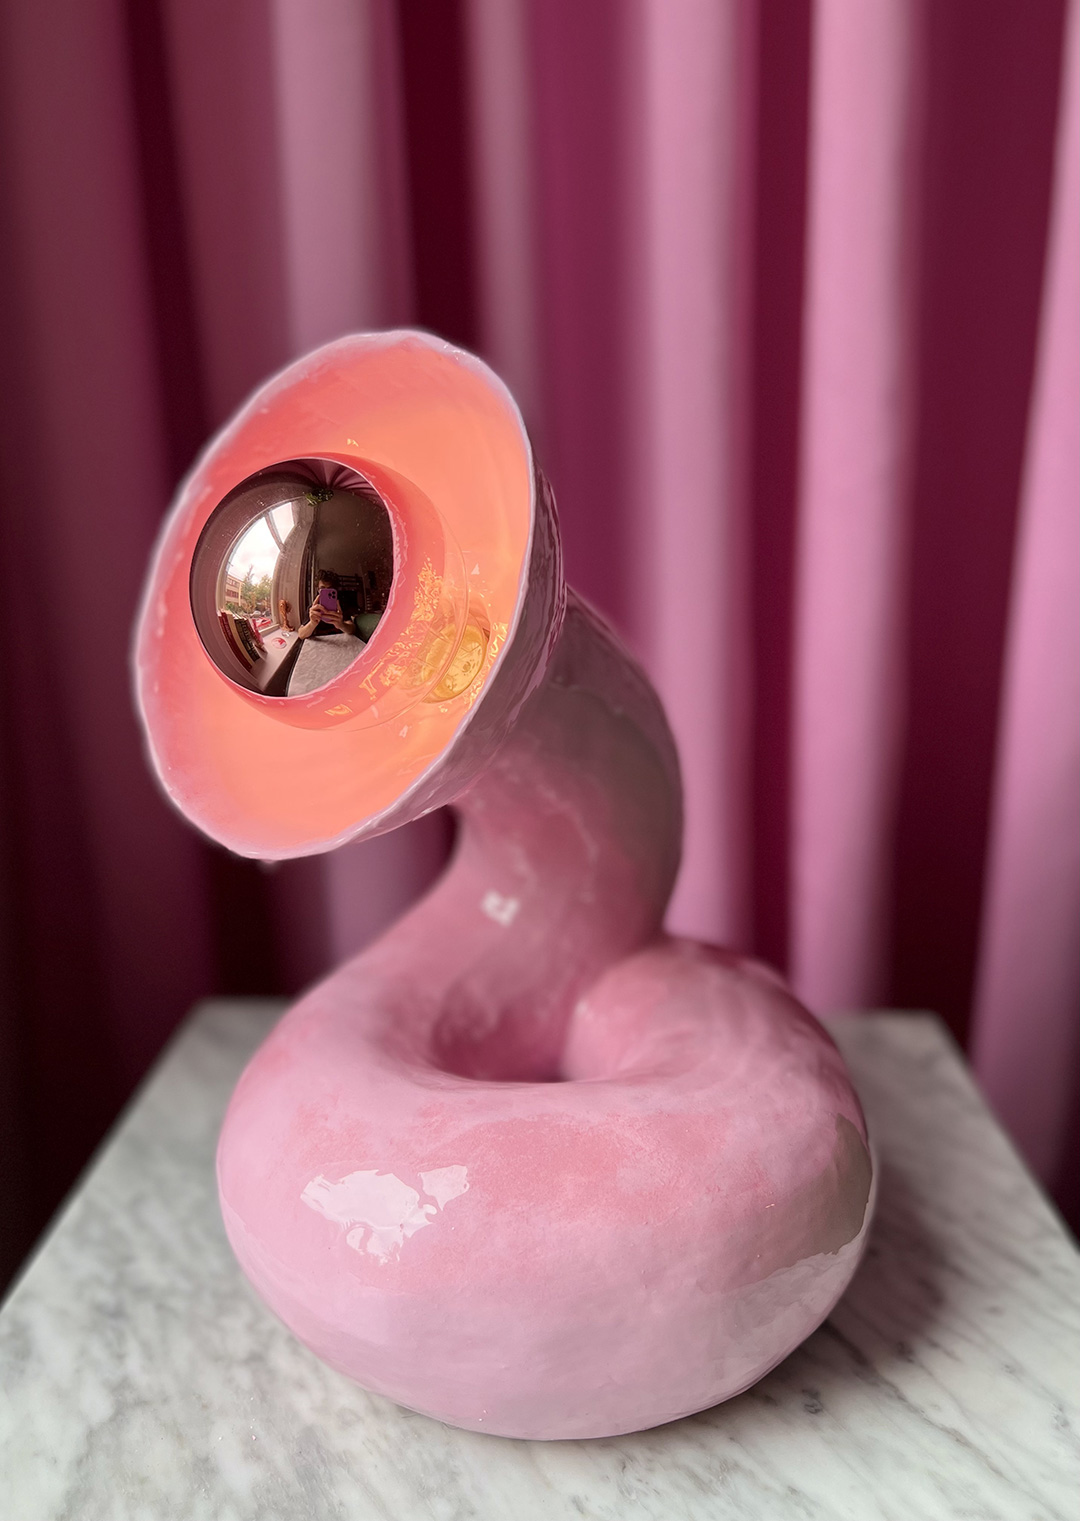 ‘‘I see you’ table lamp in a shade of pink